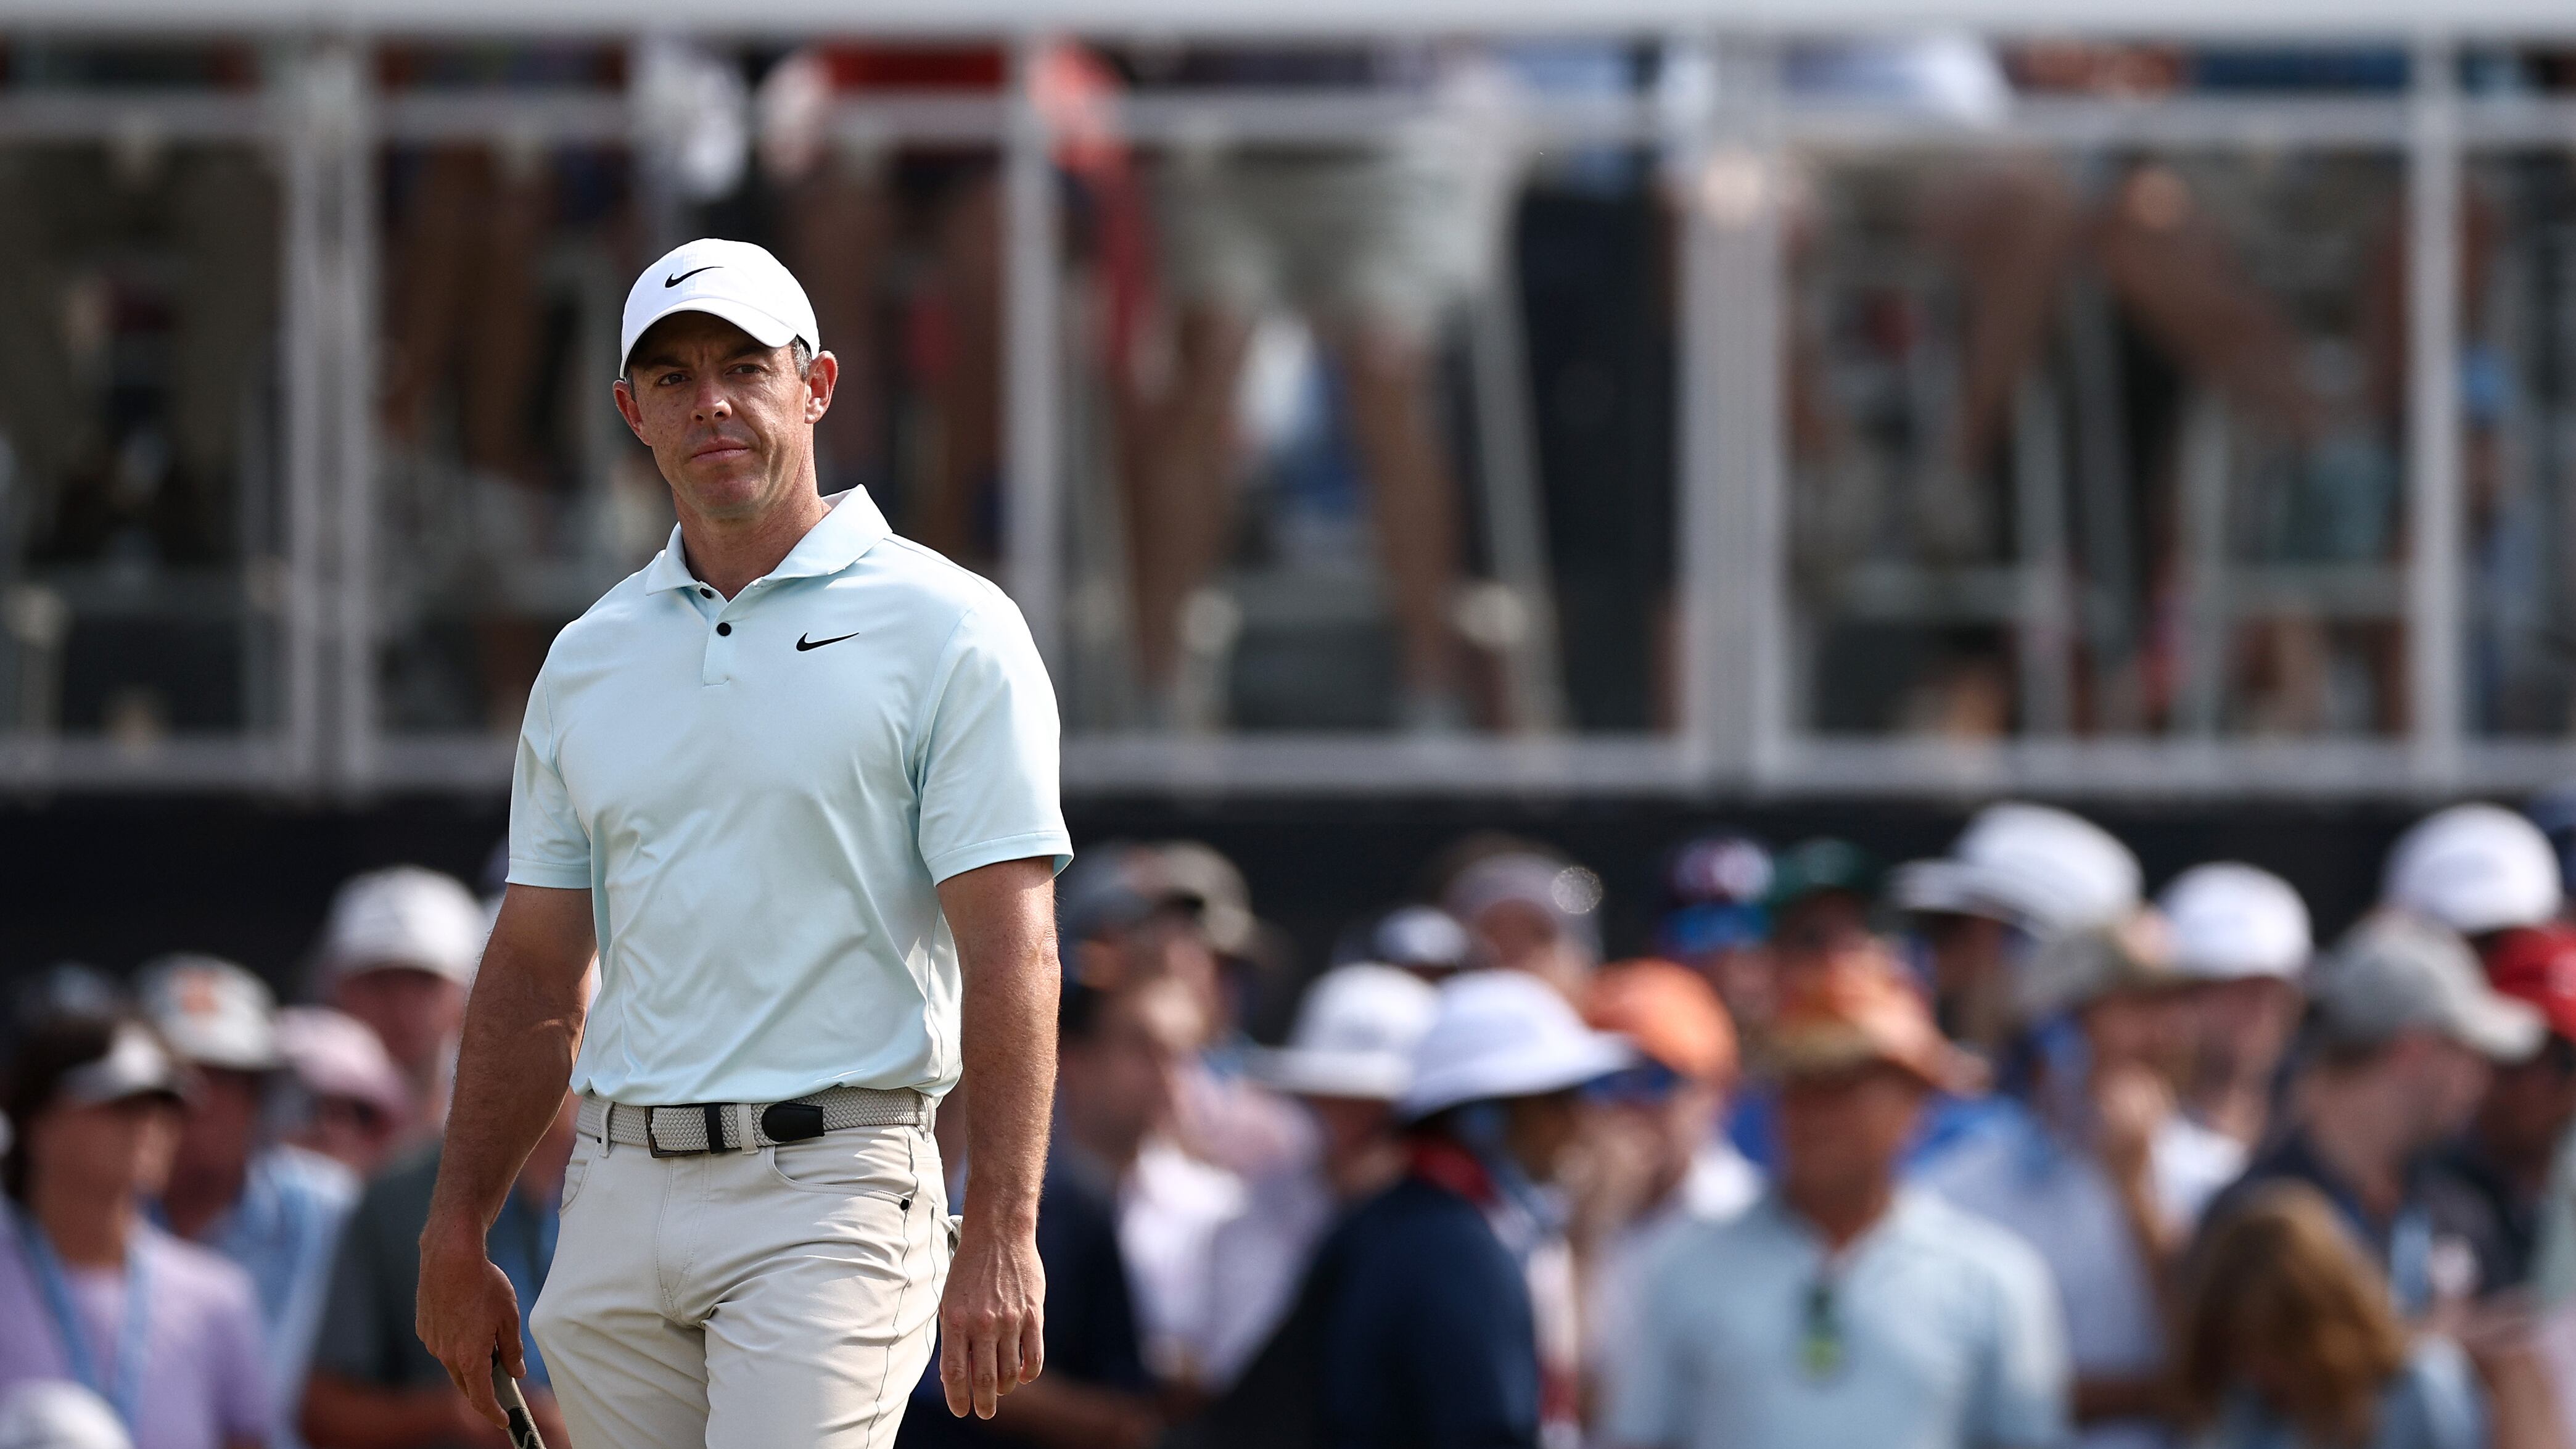 PINEHURST, NORTH CAROLINA - JUNE 16: Rory McIlroy of Northern Ireland reacts on the 13th green during the final round of the 124th U.S. Open at Pinehurst Resort on June 16, 2024 in Pinehurst, North Carolina. (Photo by Jared C. Tilton/Getty Images)